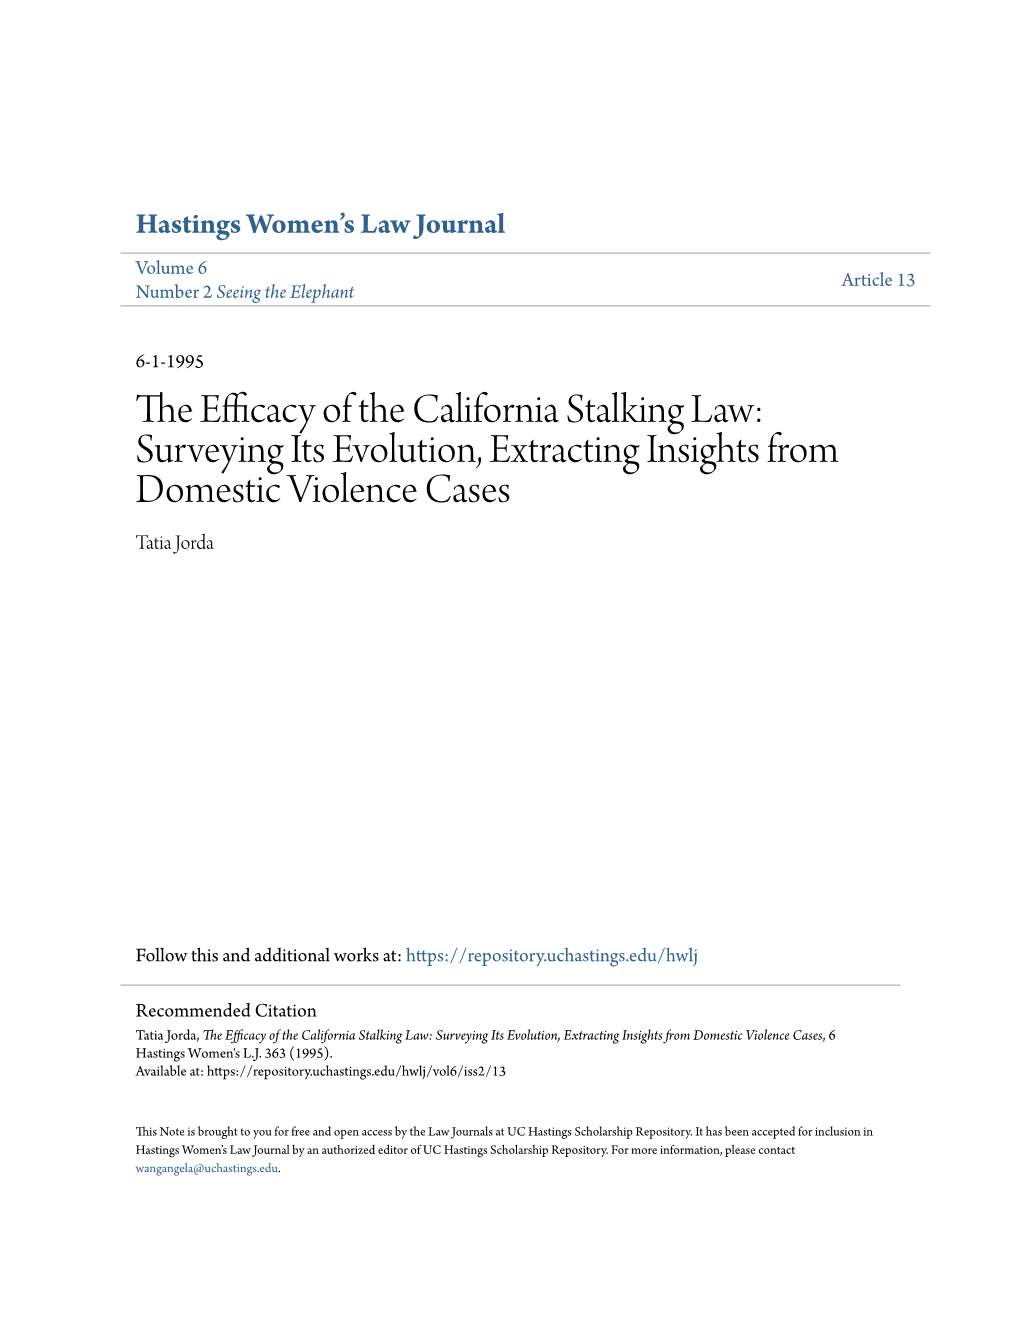 The Efficacy of the California Stalking Law: Surveying Its Evolution, Extracting Insights from Domestic Violence Cases, 6 Hastings Women's L.J